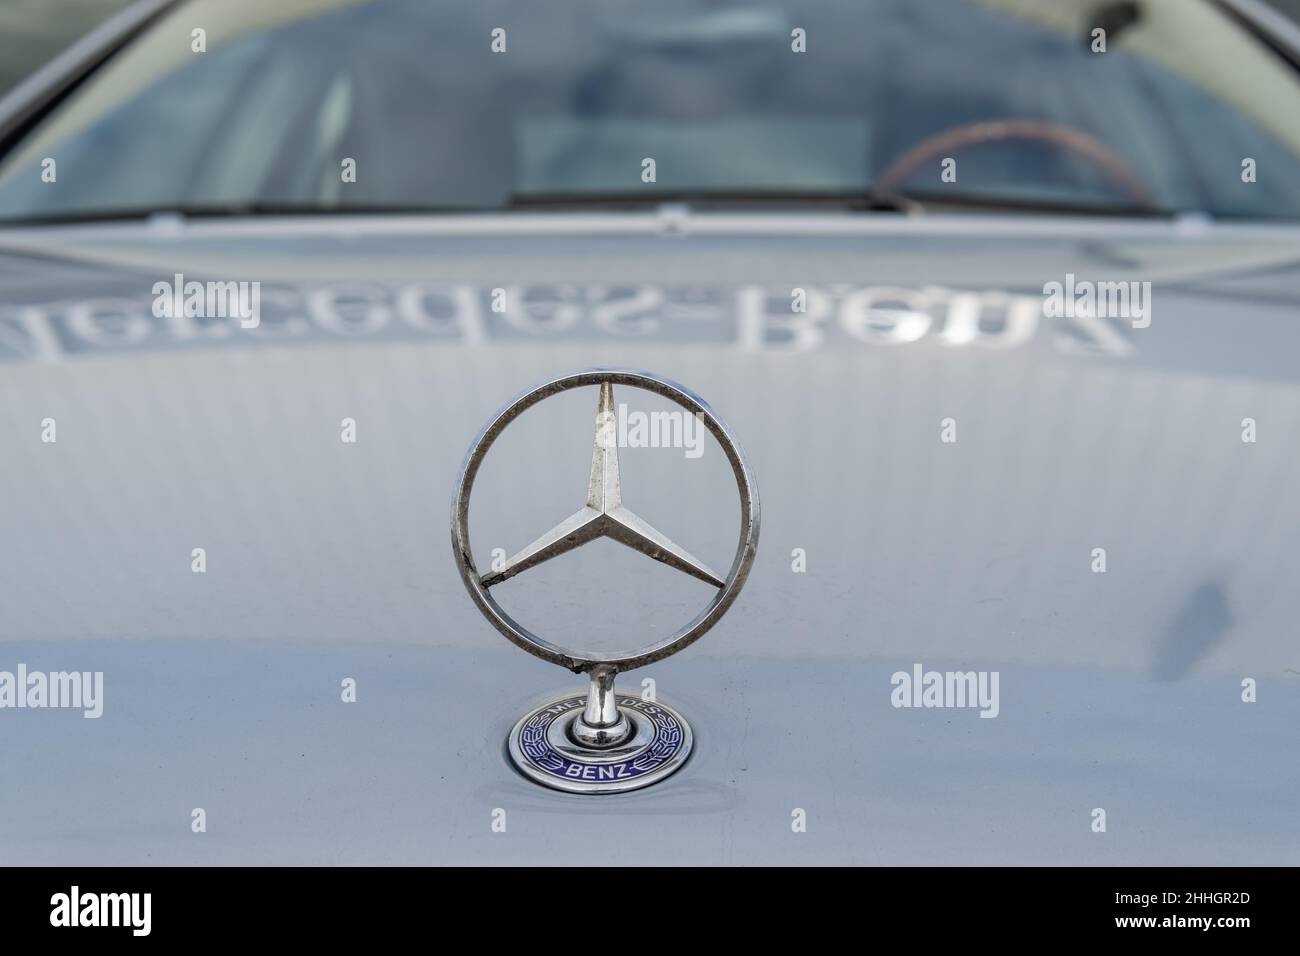 Manacor, Spain; january 20 2022: Close-up of the Mercedes-Benz automobile brand symbol on a silver-colored car Stock Photo